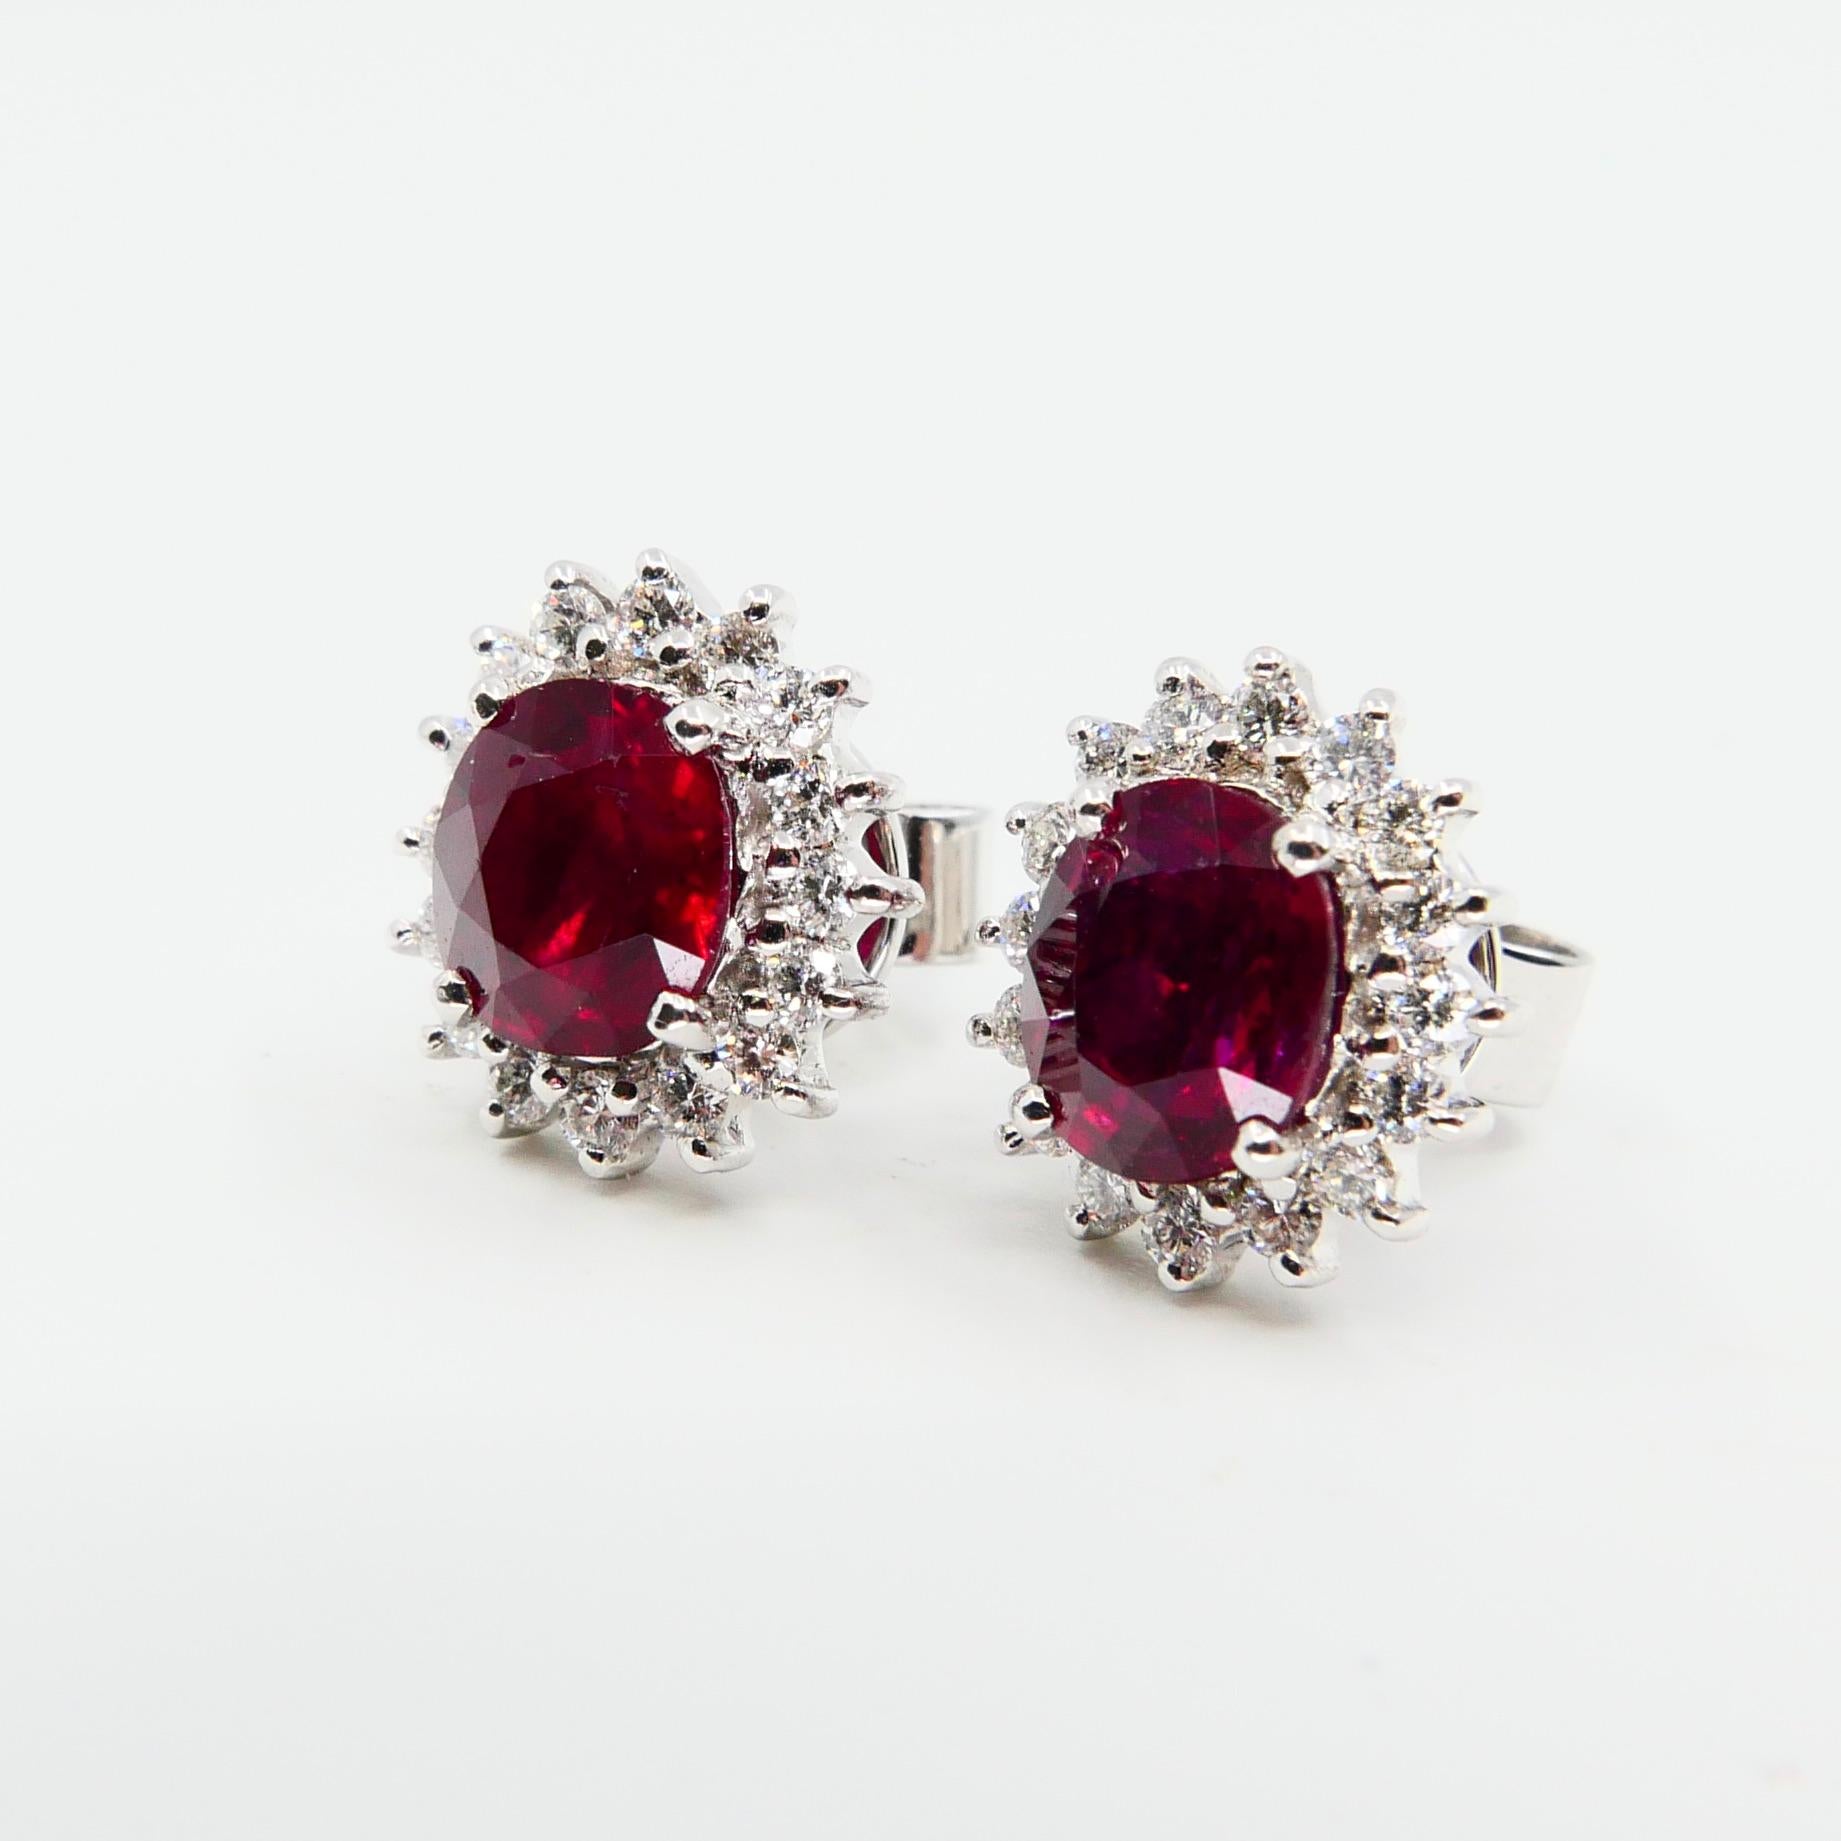 Modern Vivid Red Ruby 2.09 Carat and Diamond Stud Earrings, Close to Pigeon Blood Red